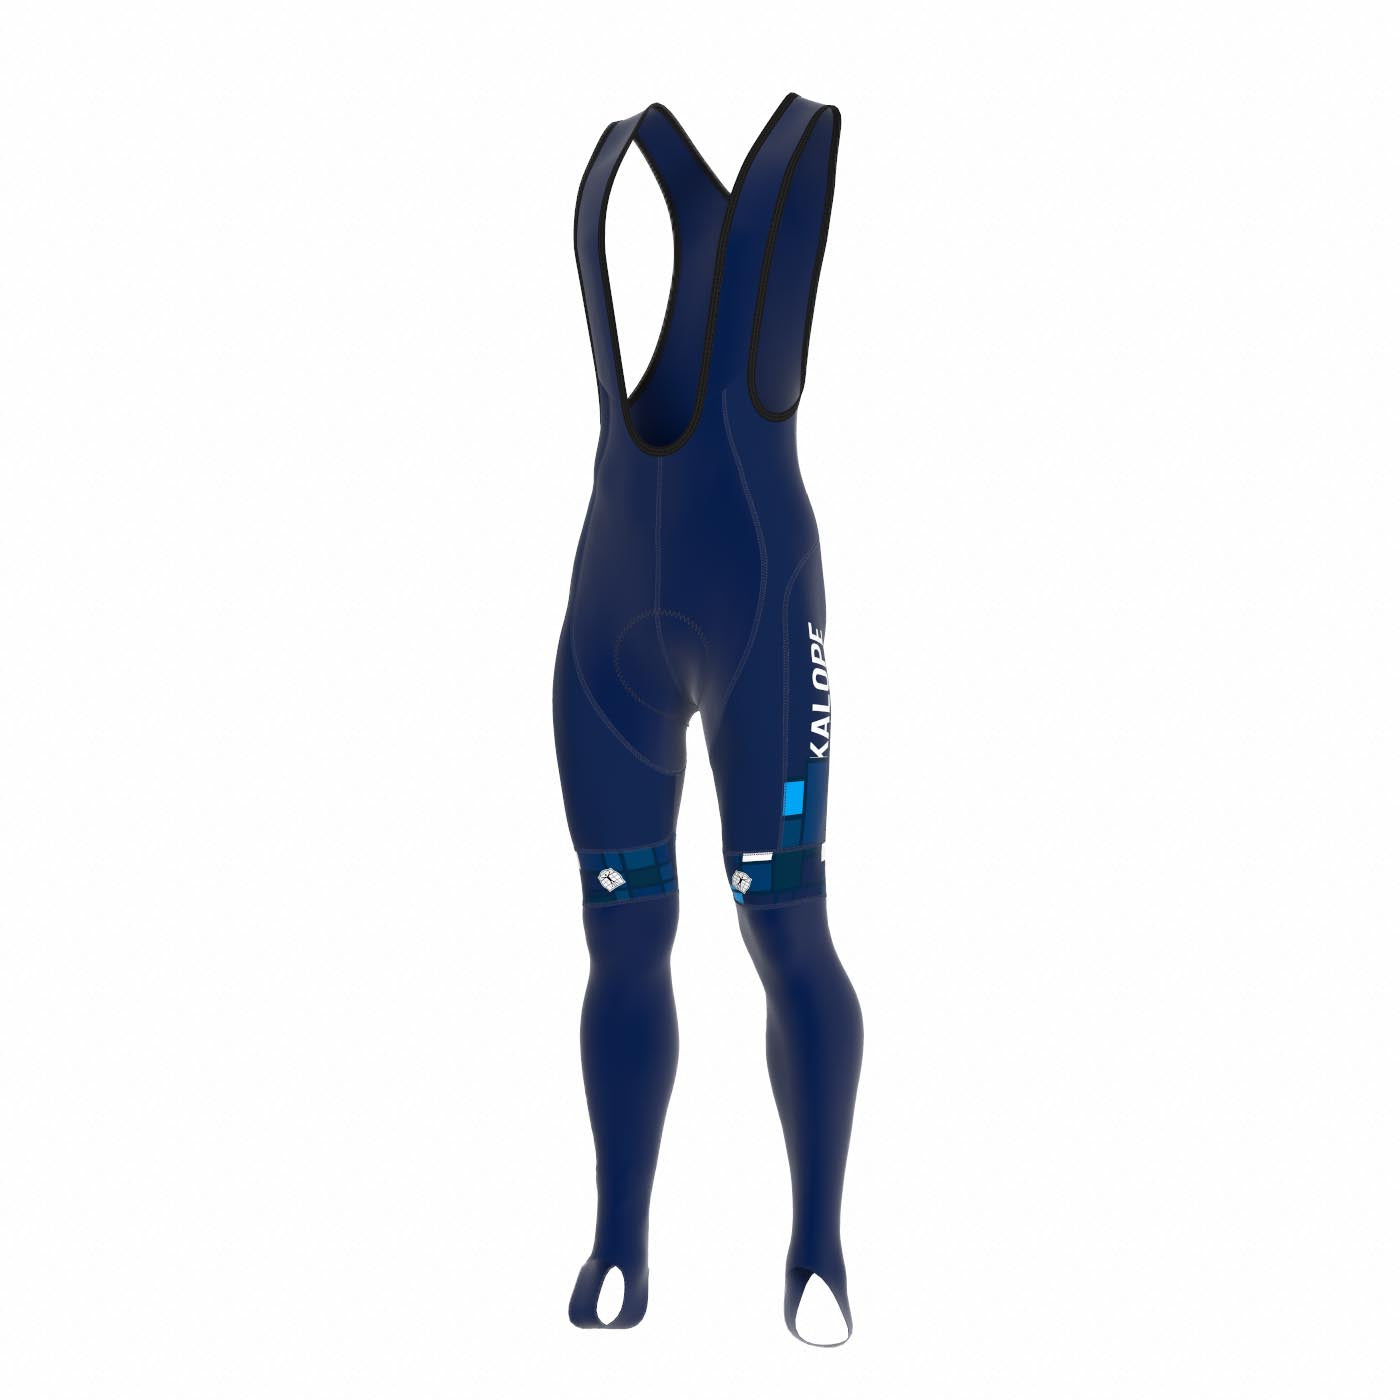 Epic Bibtights Tempest Full Protect Reflect - Women